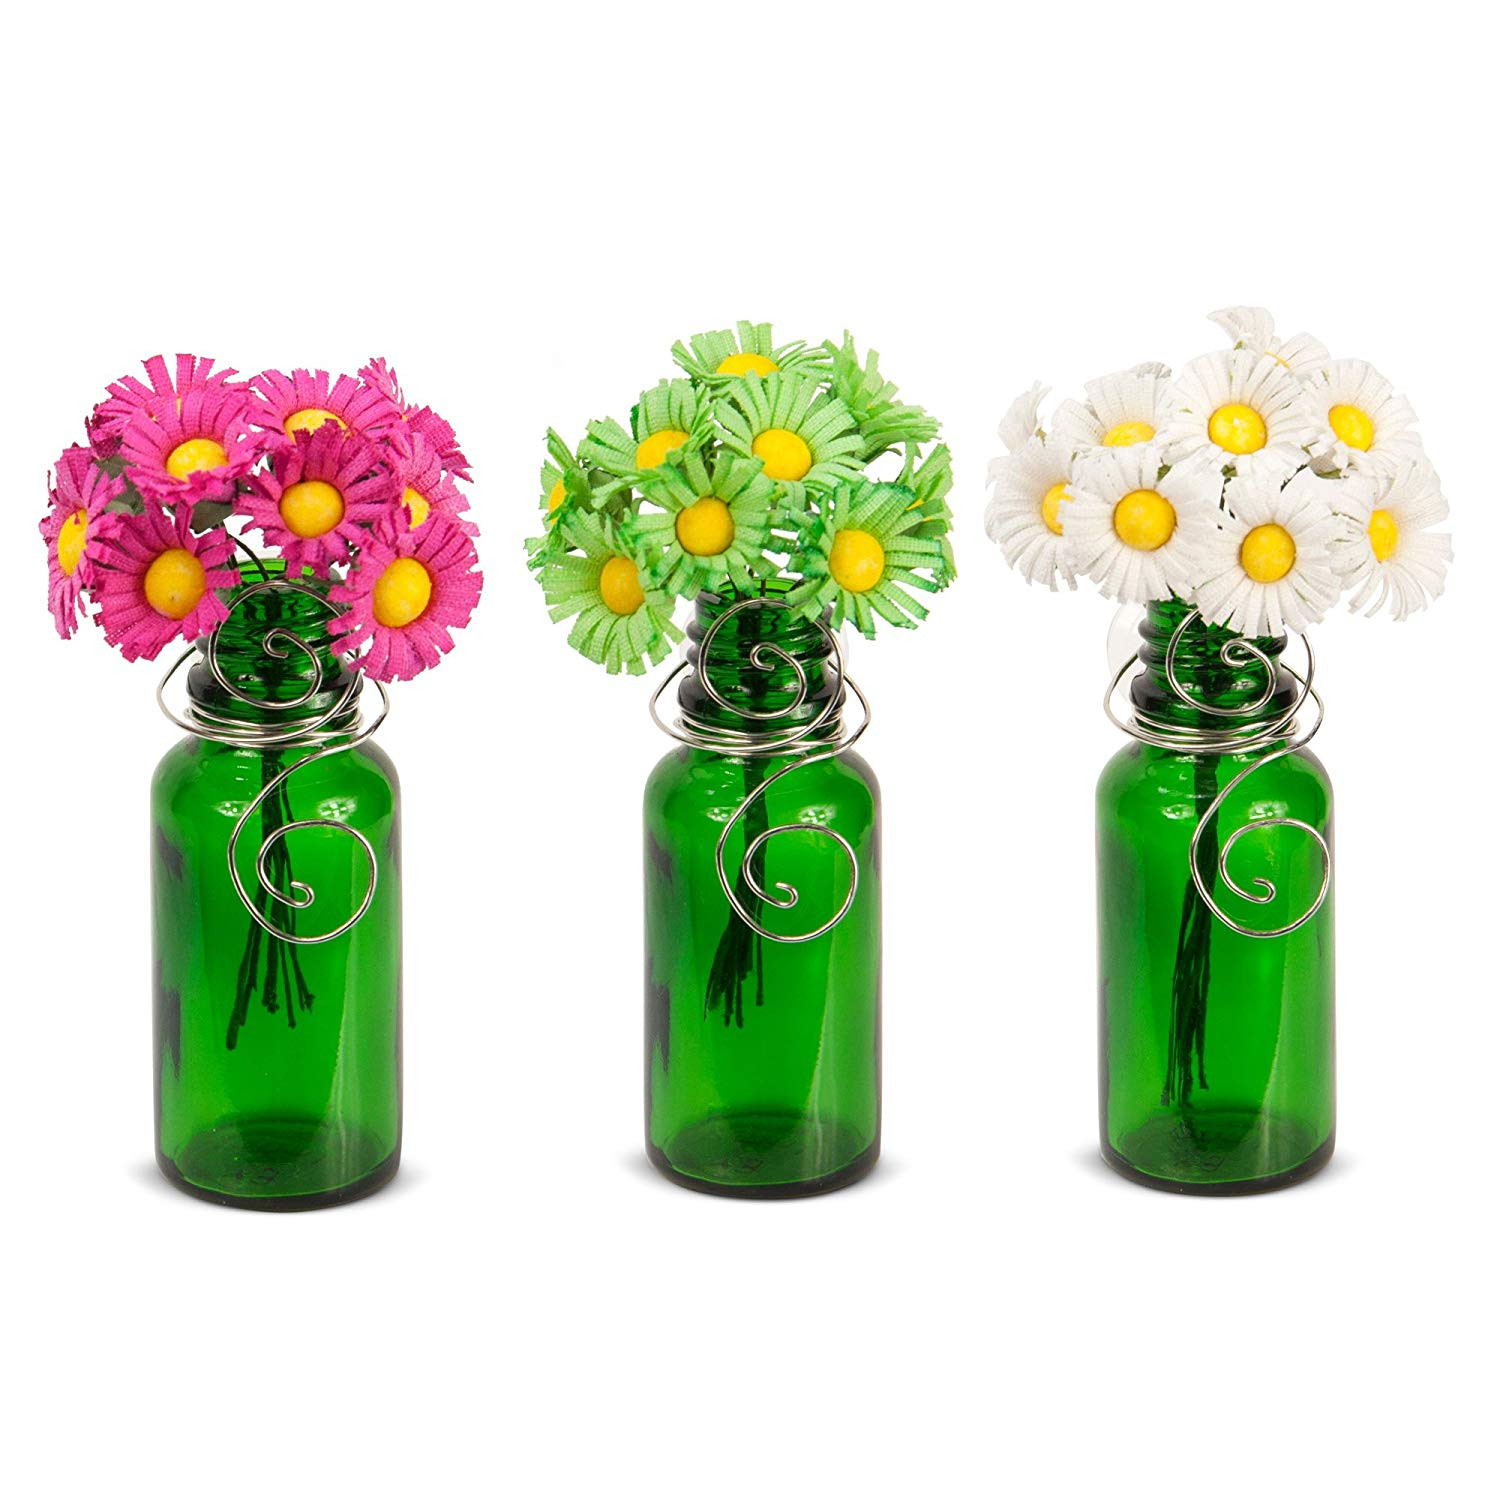 10 Trendy Glass Vase for Wine Corks 2023 free download glass vase for wine corks of amazon com vazzini mini vase bouquet suction cup bud bottle pertaining to amazon com vazzini mini vase bouquet suction cup bud bottle holder with flowers decorat